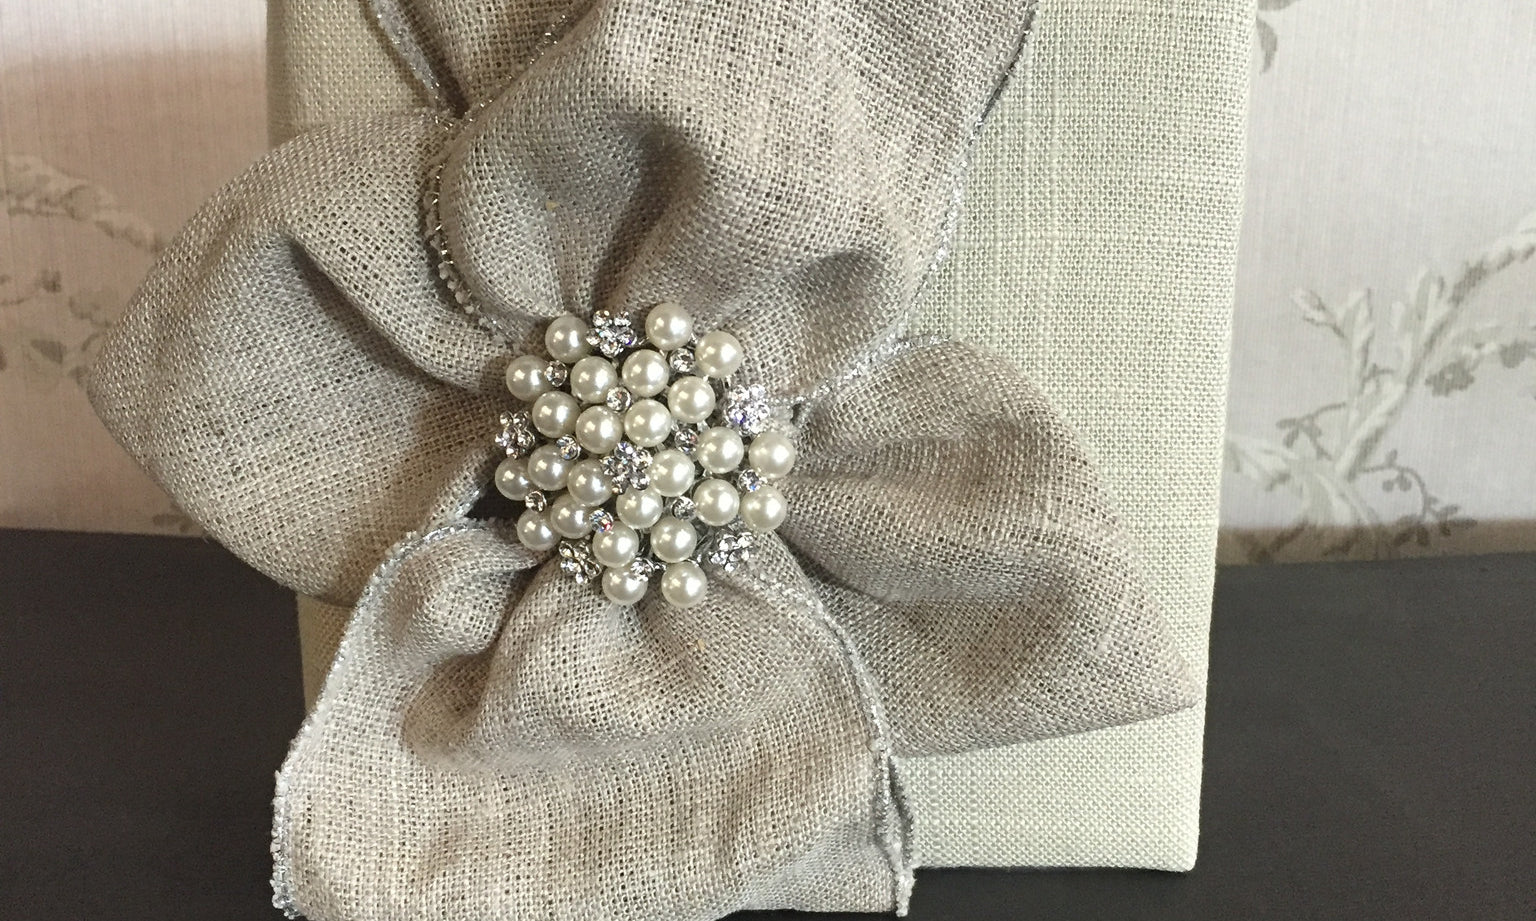 Gorgeous Pearl Brooch and Linen Photo Albums / Brag Books